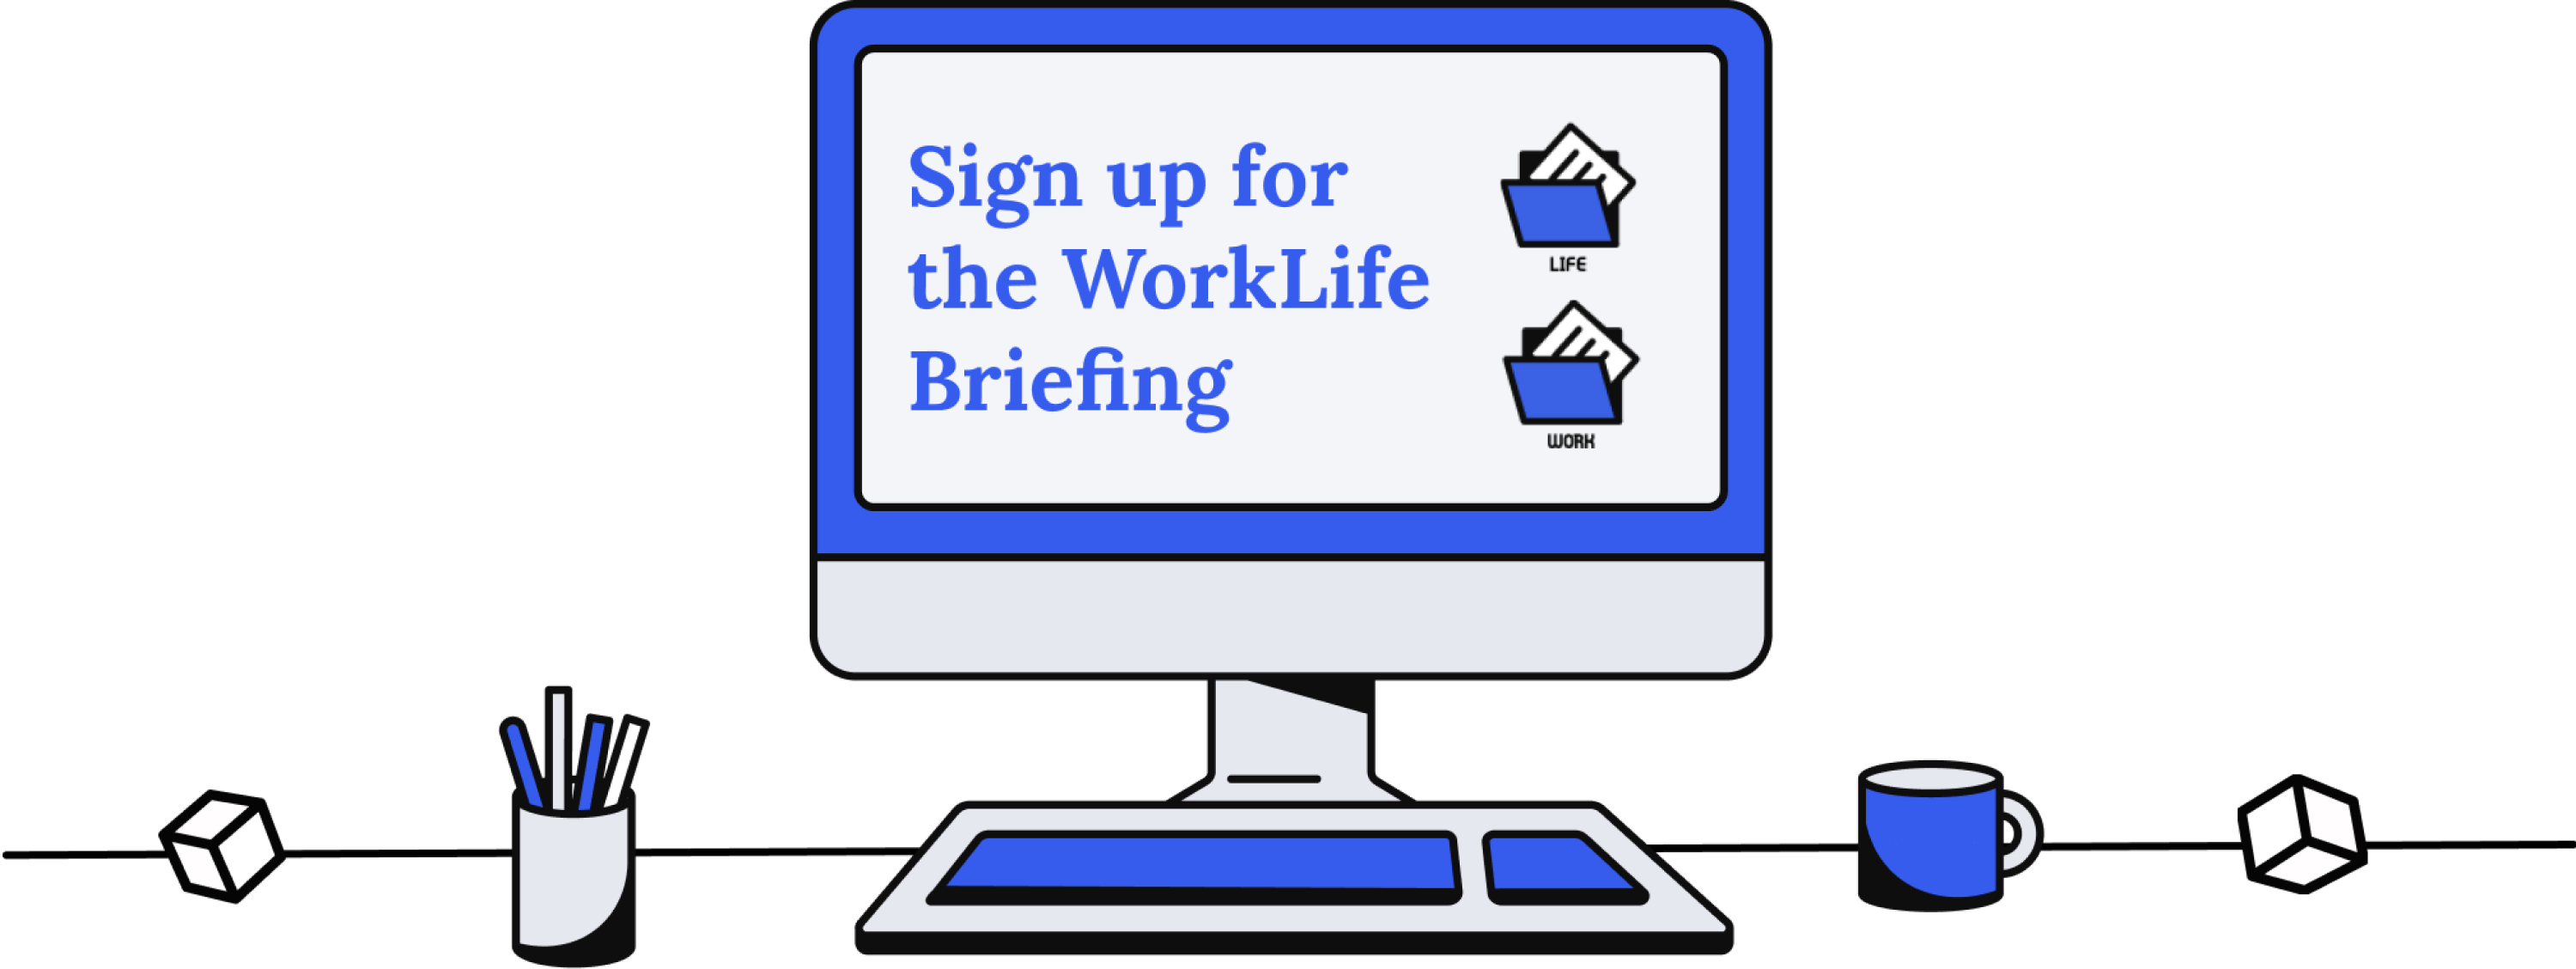 Header image for WorkLife's newsletter landing page. Shows a computer screen with text that reads 'Sign up for the WorkLife Briefing'.